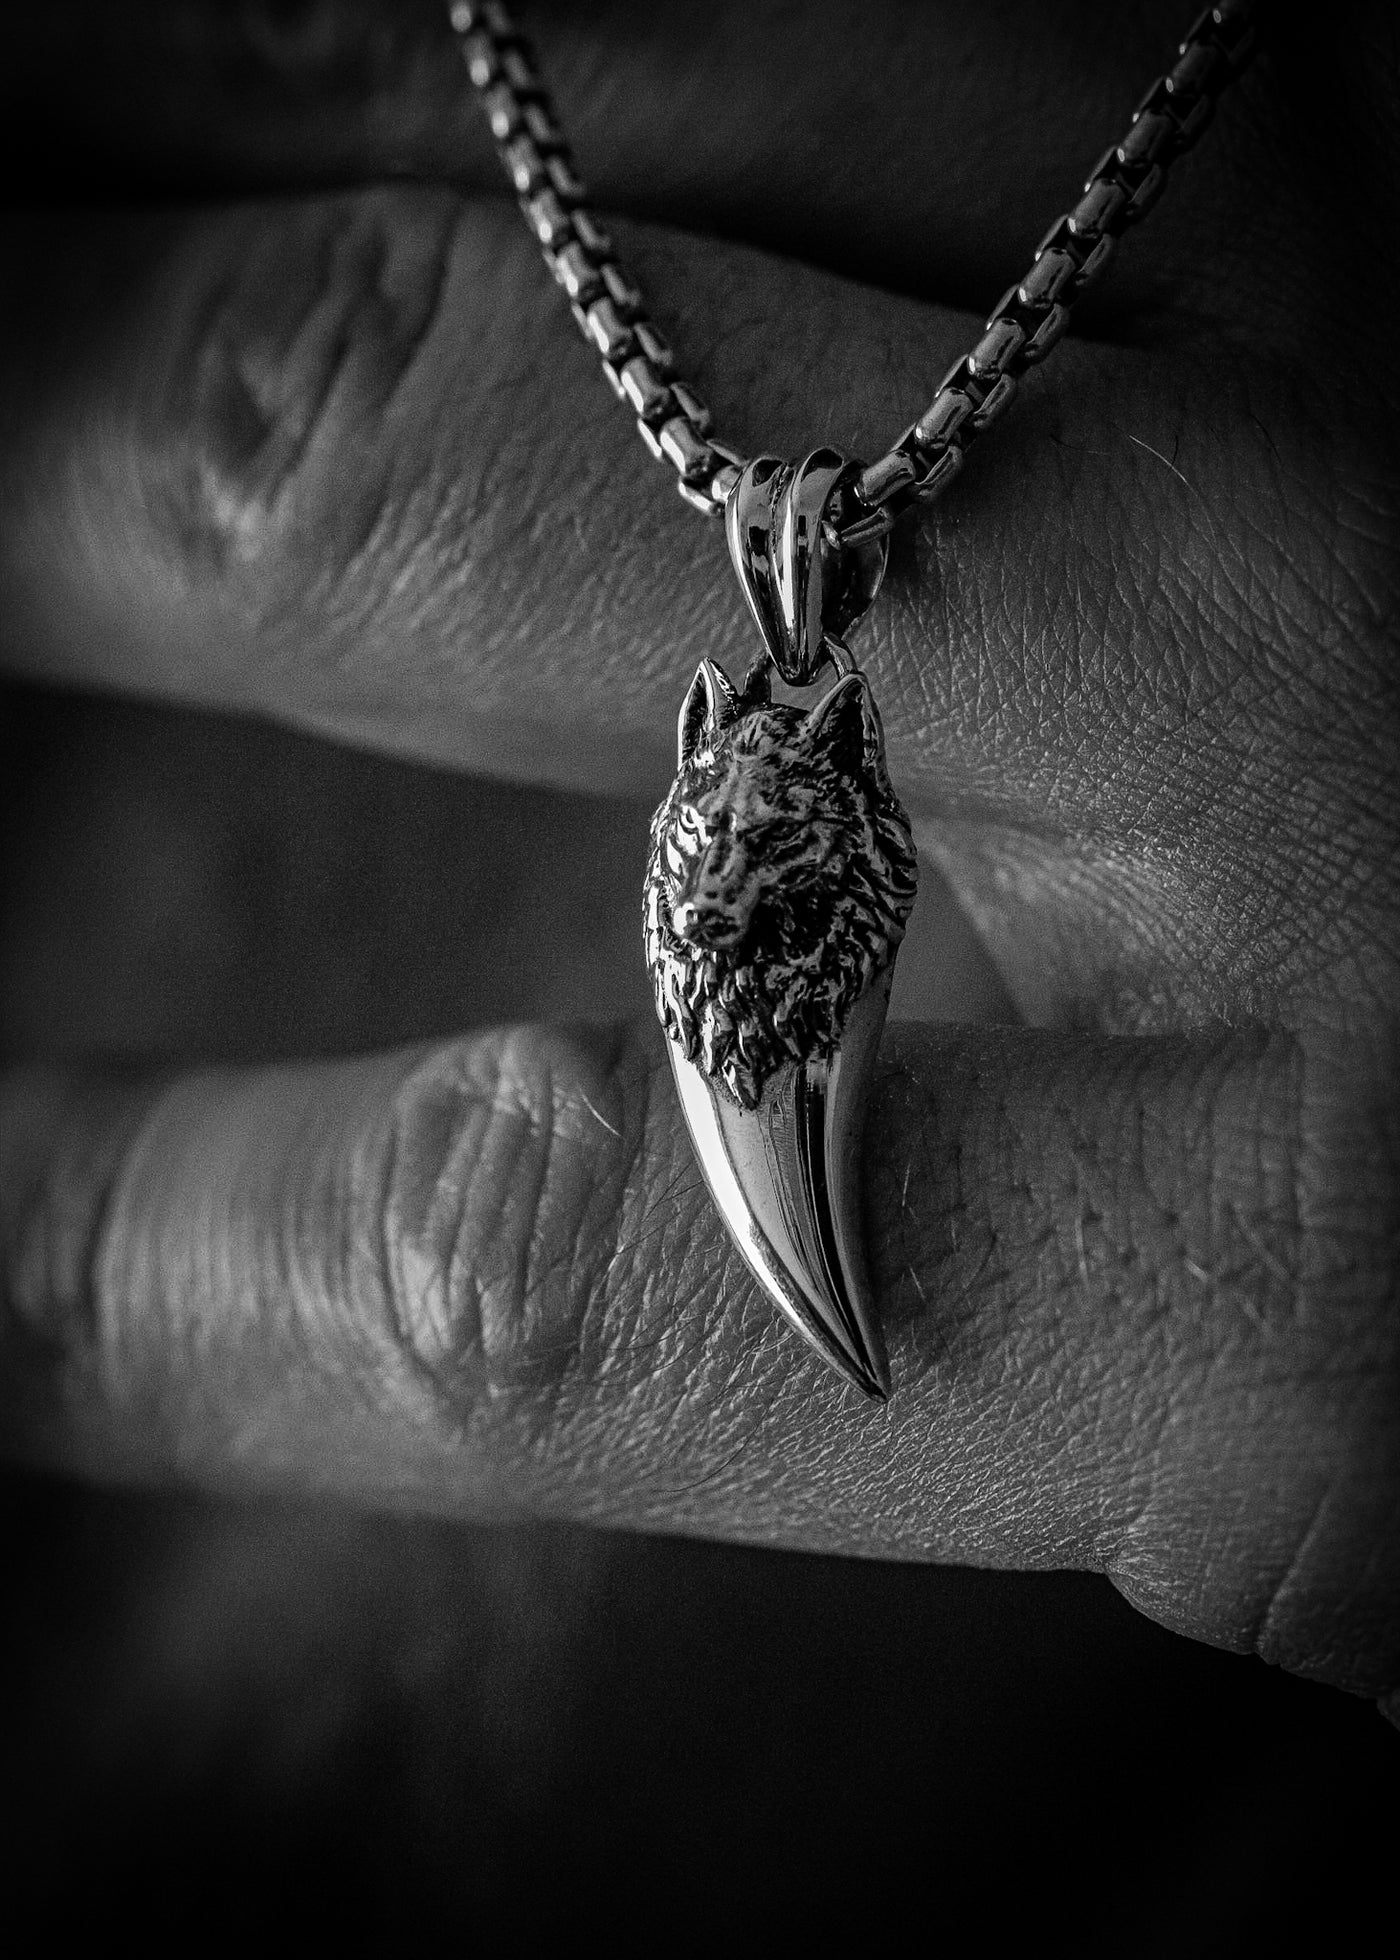 Wolf Fang Silver Pendant